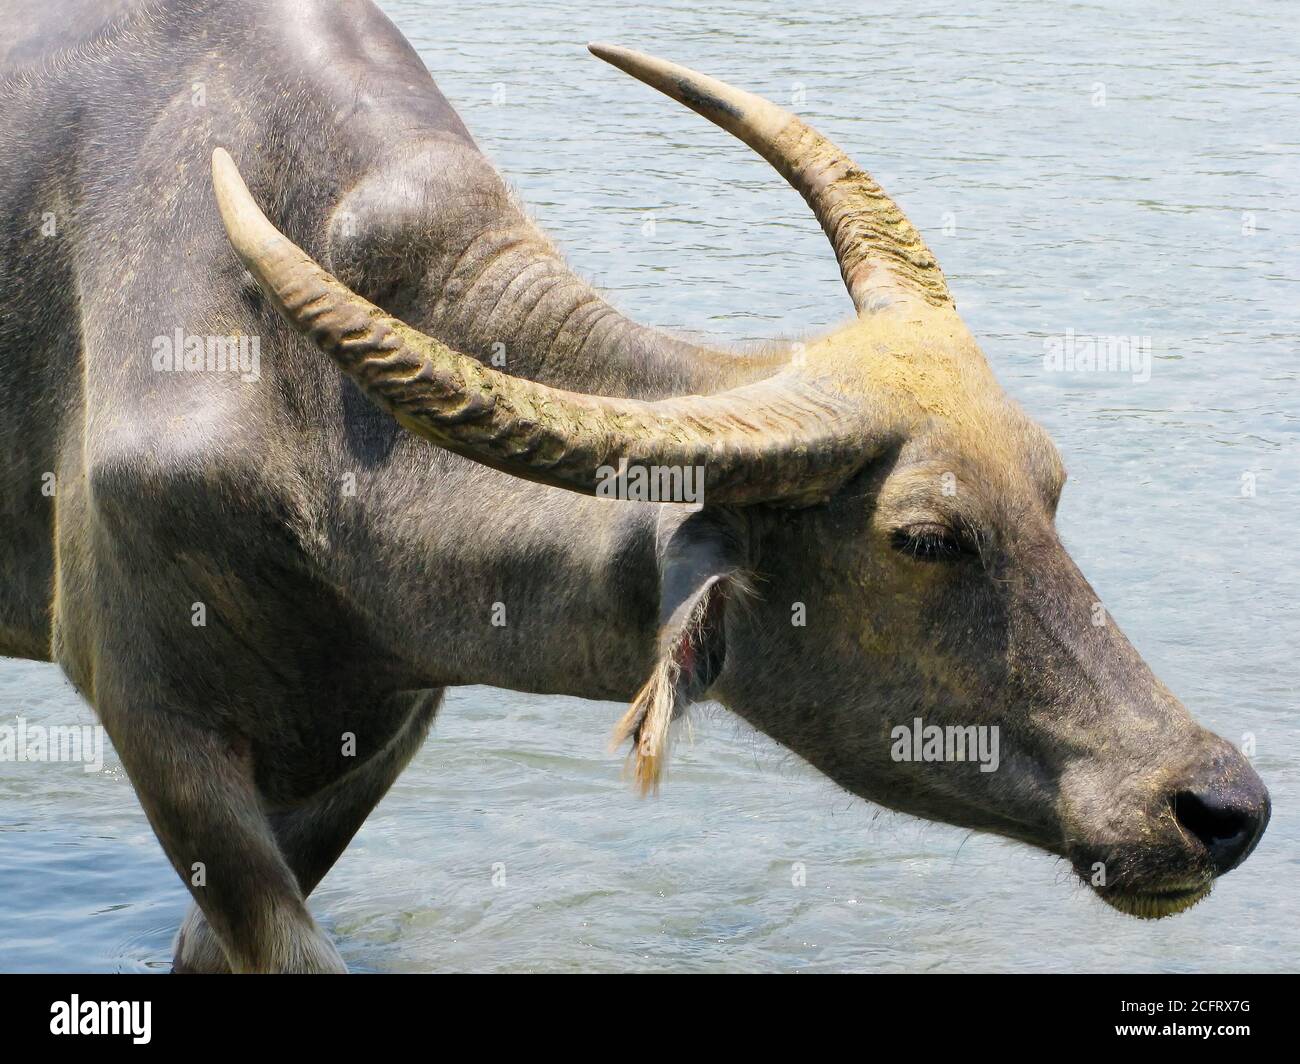 Close-up portrait of a water buffalo with big horns. This carabao leaving a pool of water, Luzon, Philippines Stock Photo